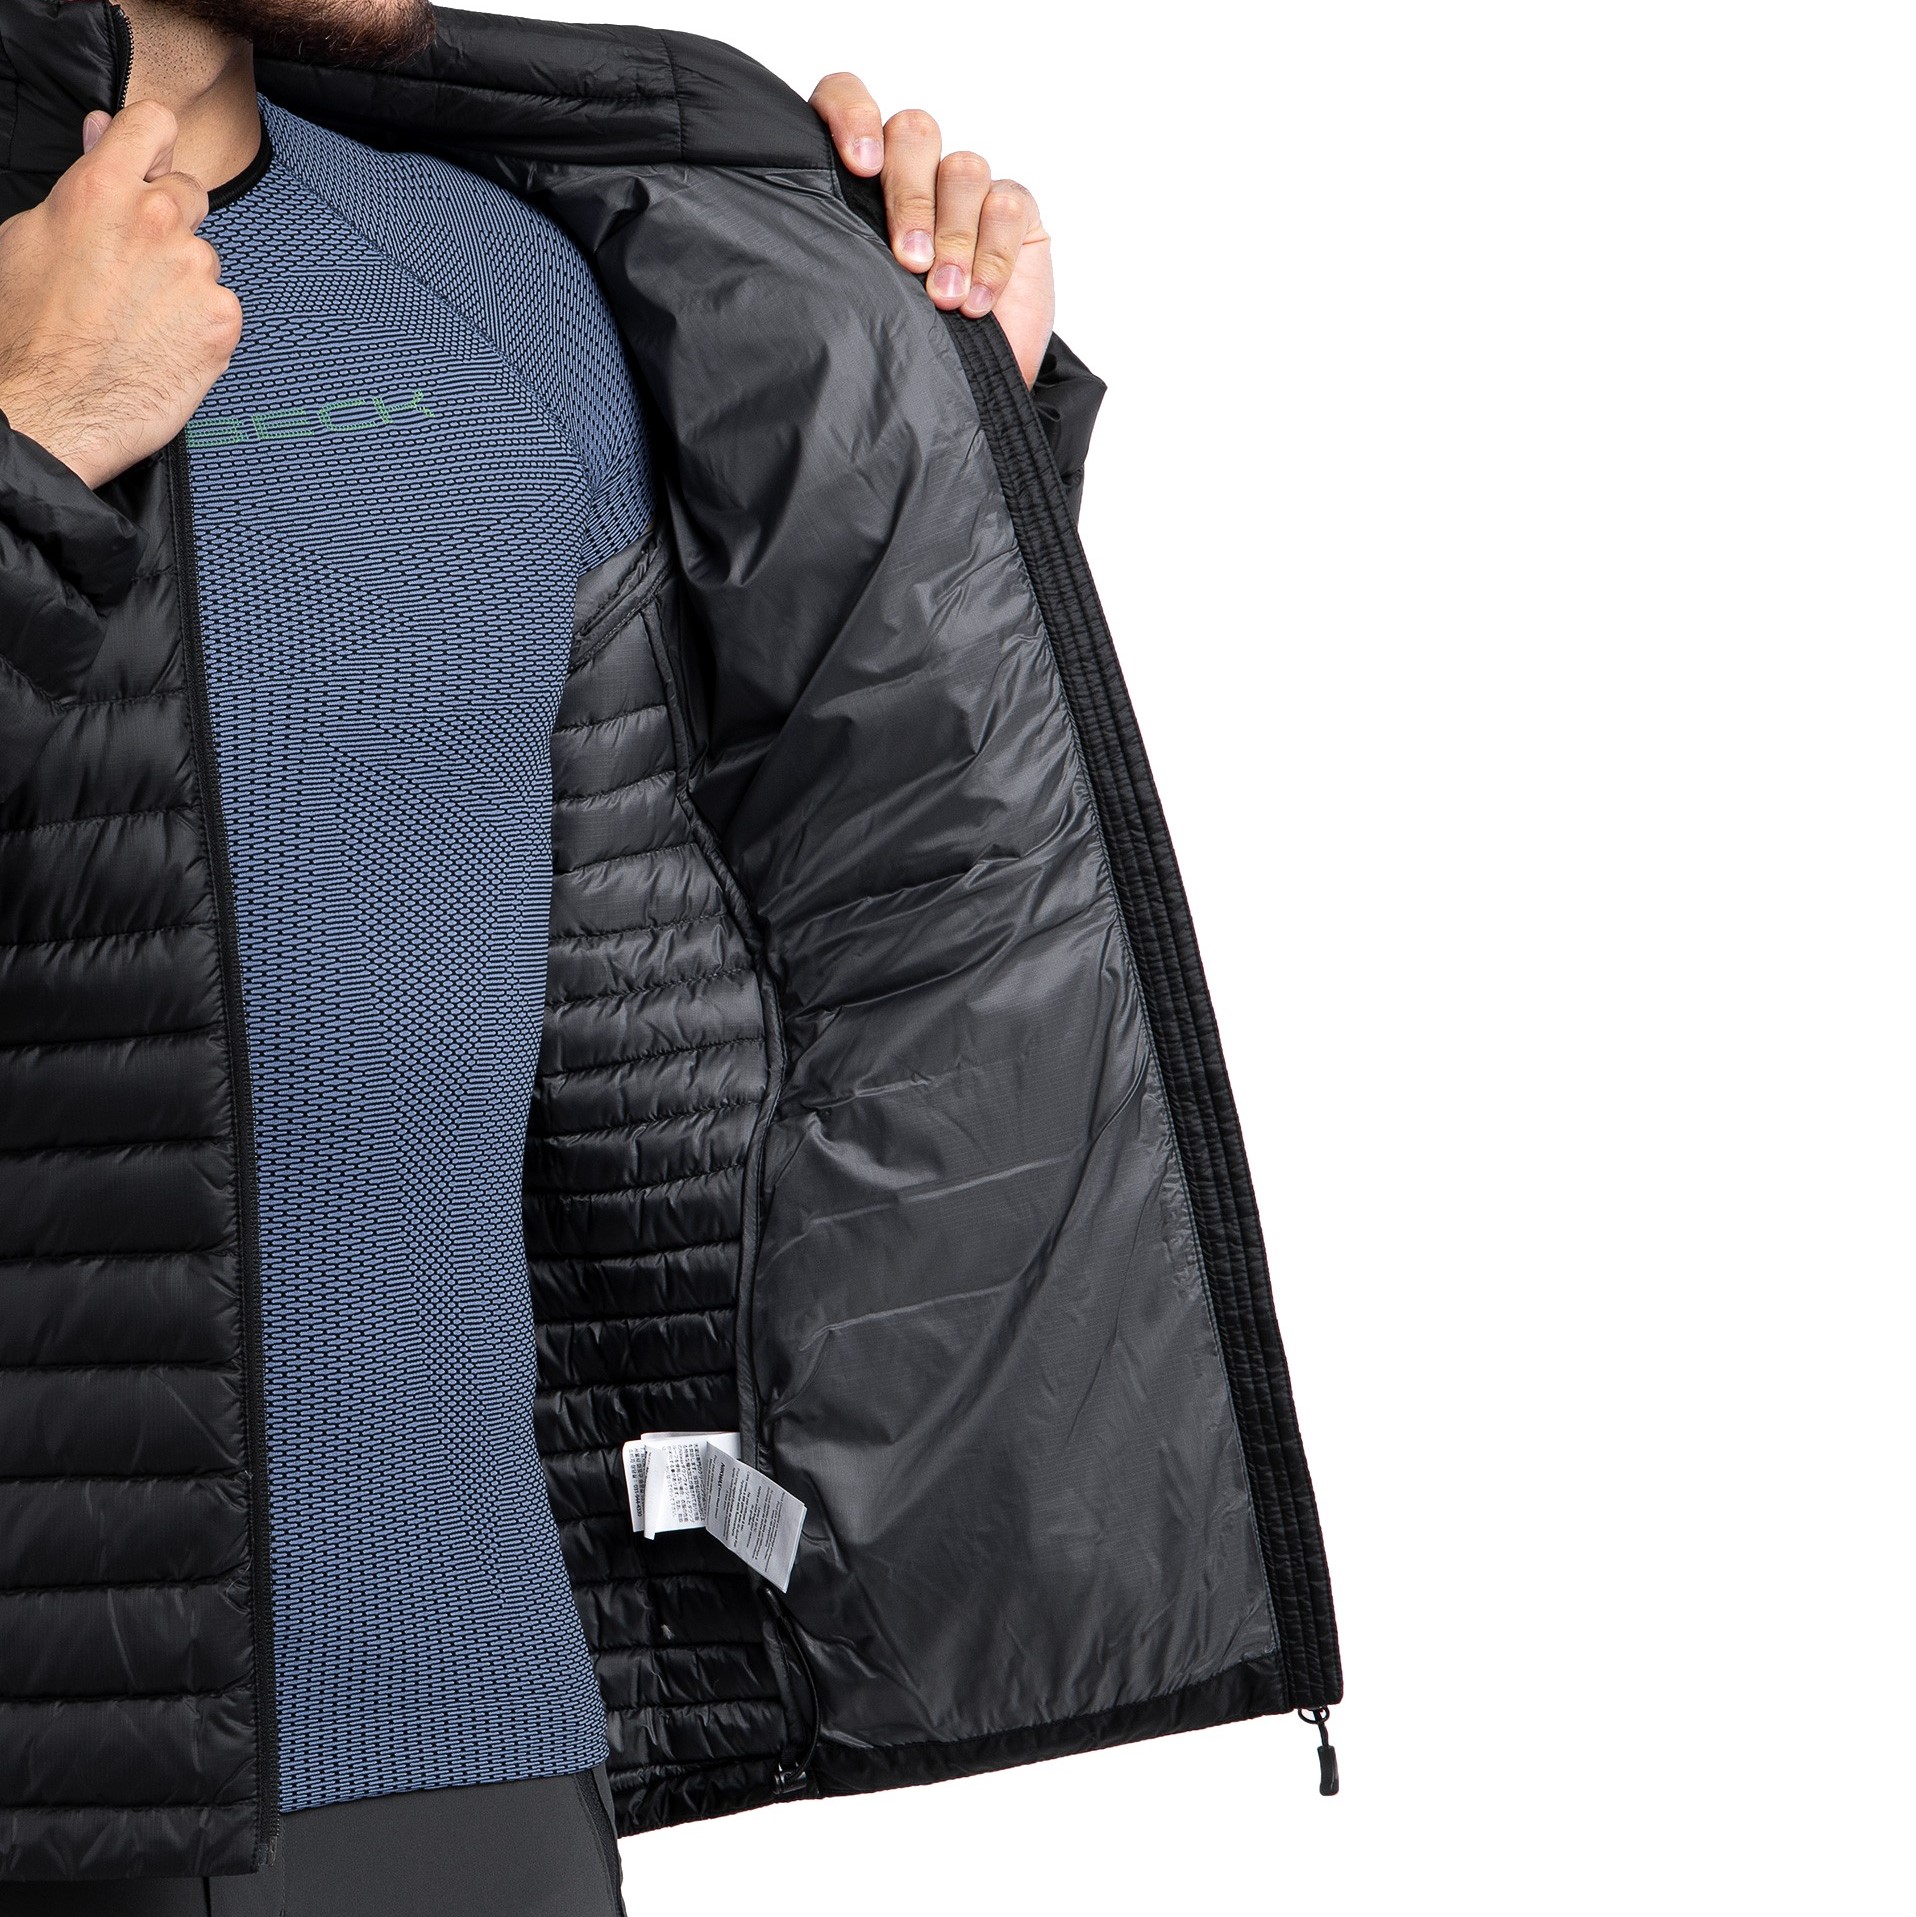 Rab Microlight Insulated Down Jacket